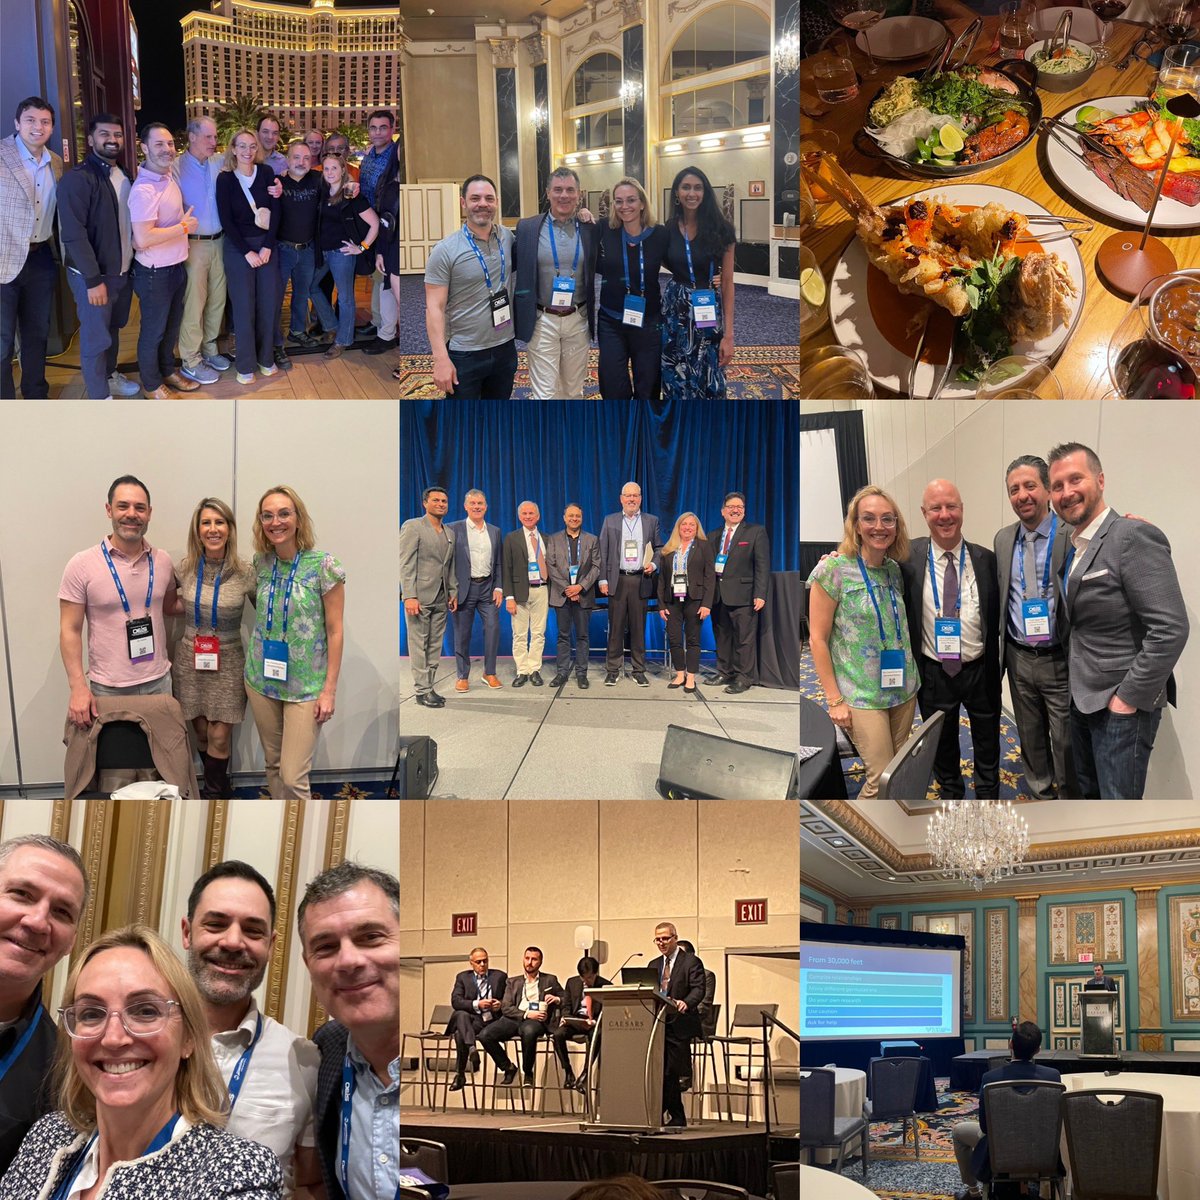 @oeis BOMB outpt meeting. And I got to see all of my friends, I miss you all already! @DonGarbettMD @Watts_IR @bretwiechmann @drmcumming @DrLipman1 @FadiSaab17 @kymbee